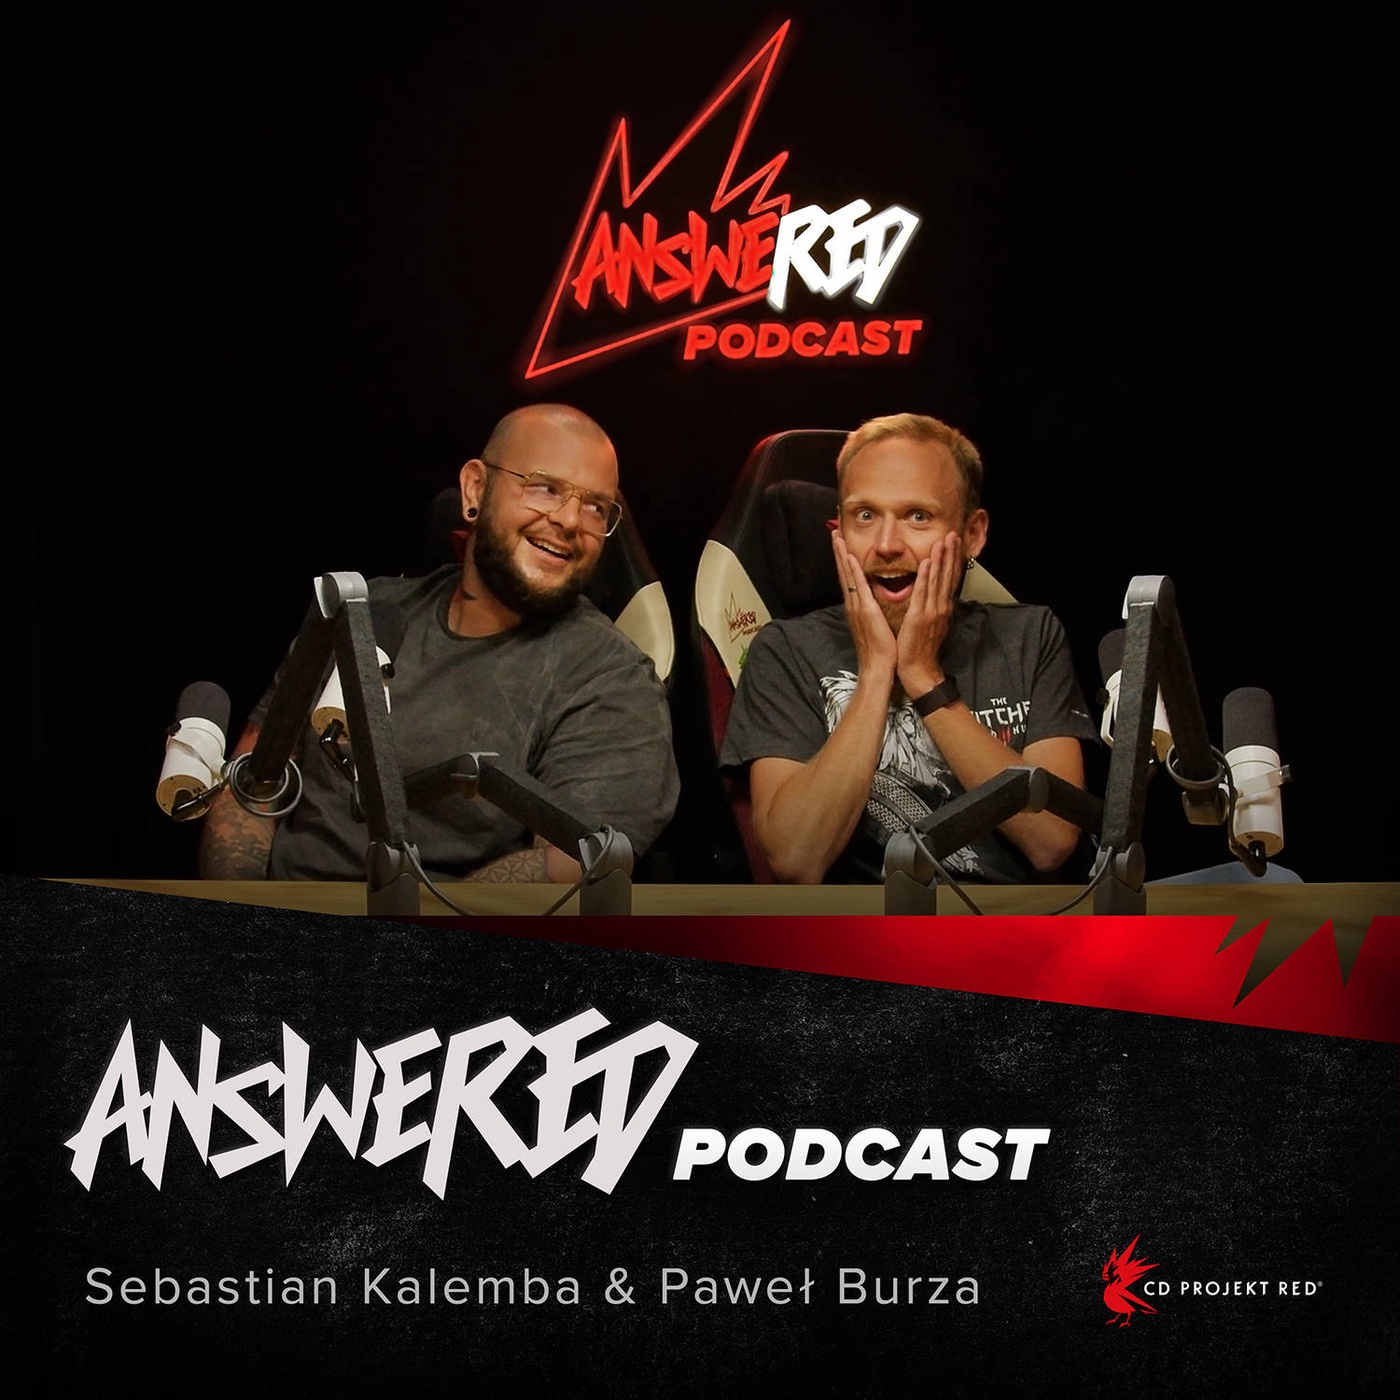 AnsweRED Podcast